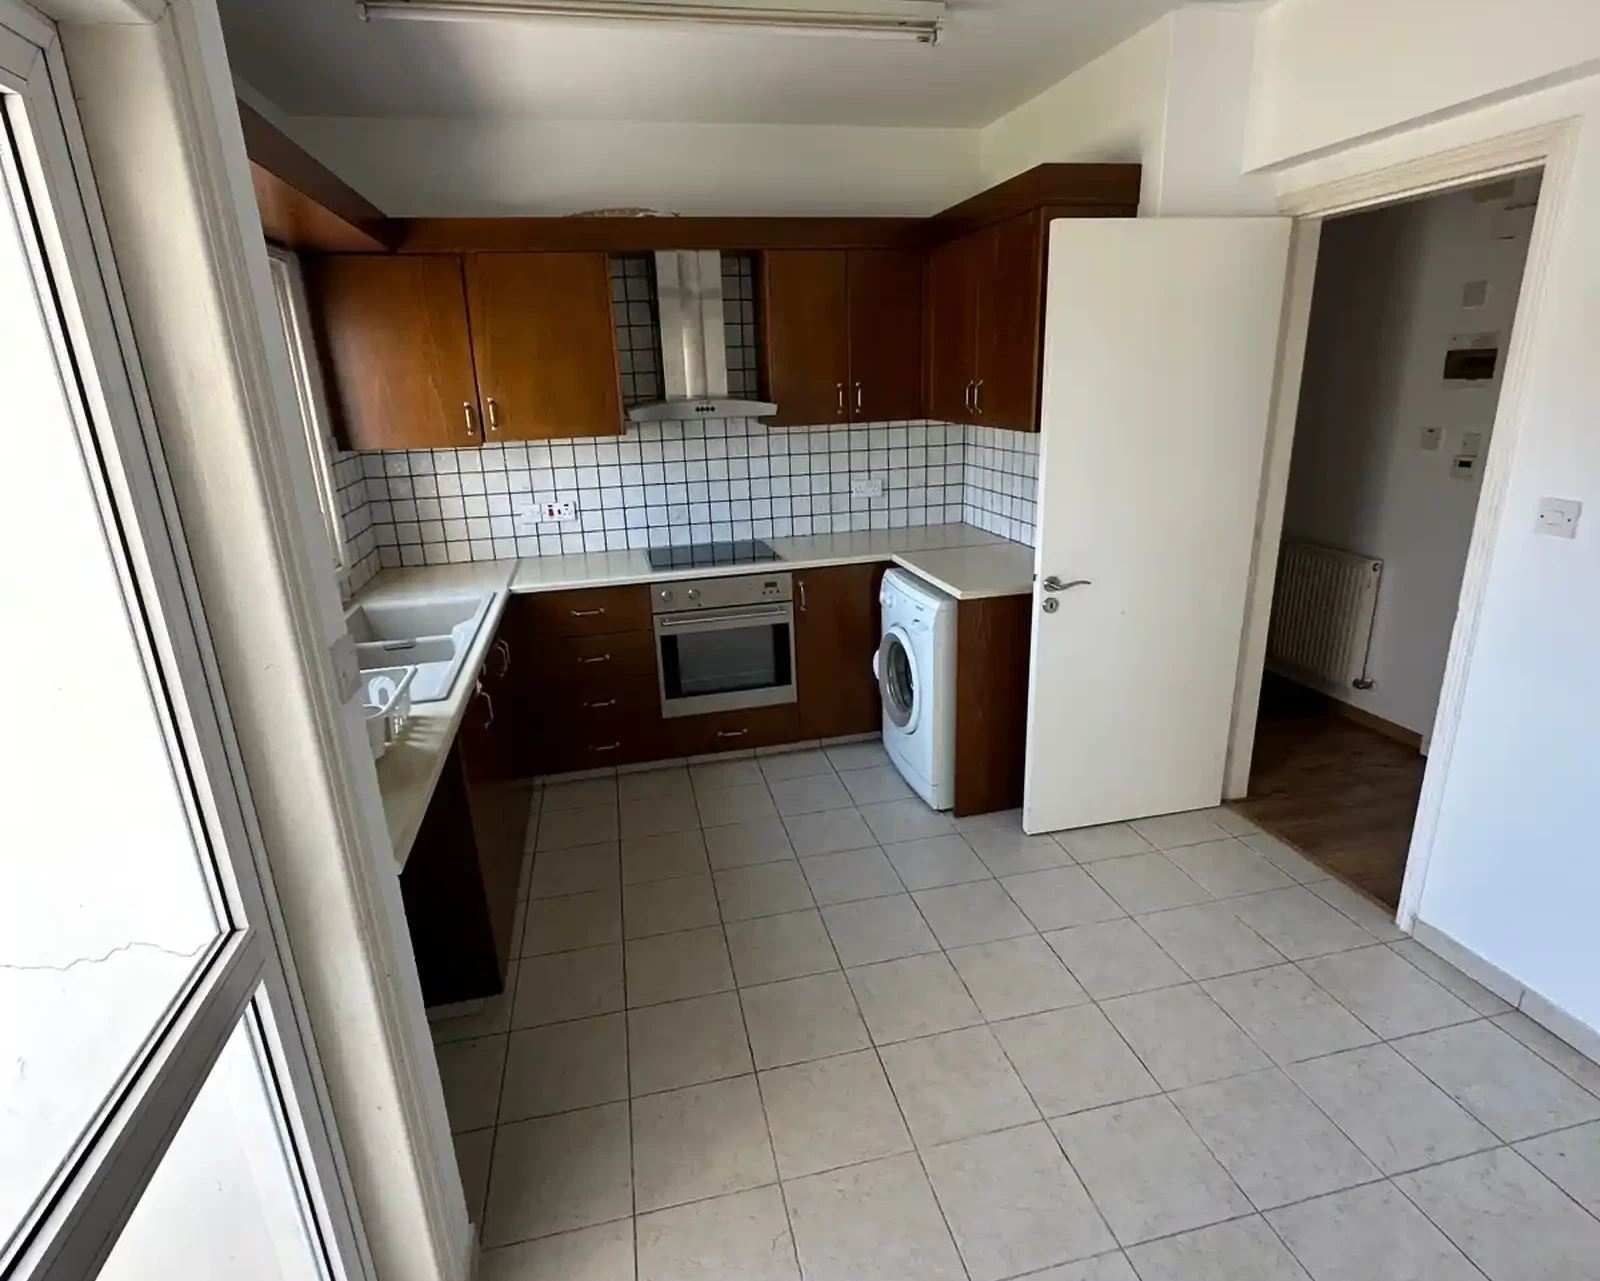 2-bedroom apartment fоr sаle €165.000, image 1